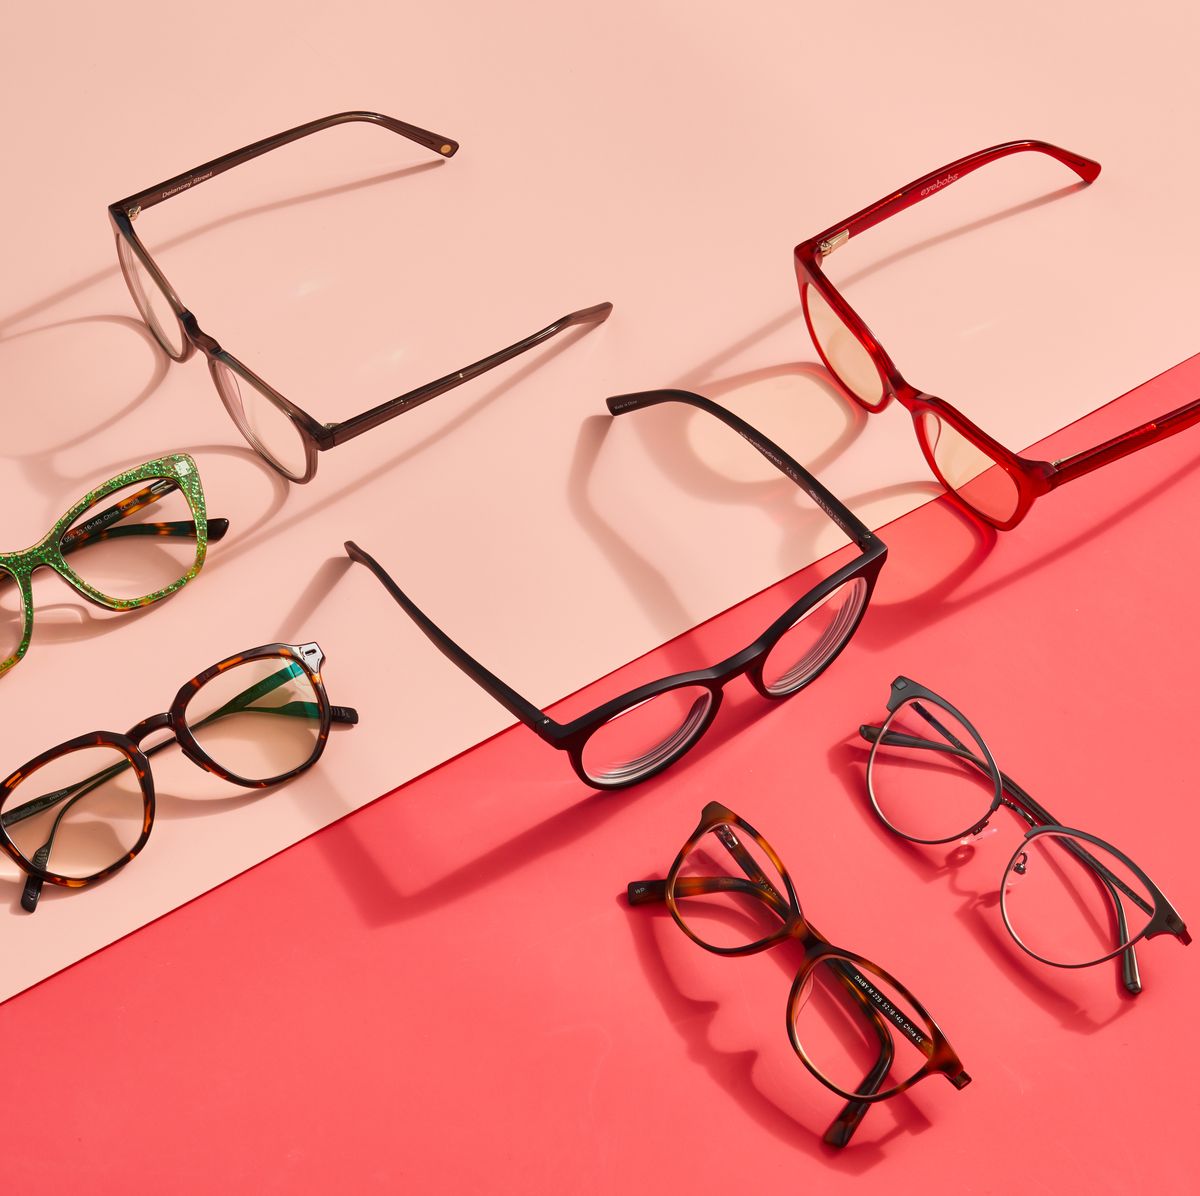 Fake Glasses: Use Cases, Where to Buy & Added Benefits